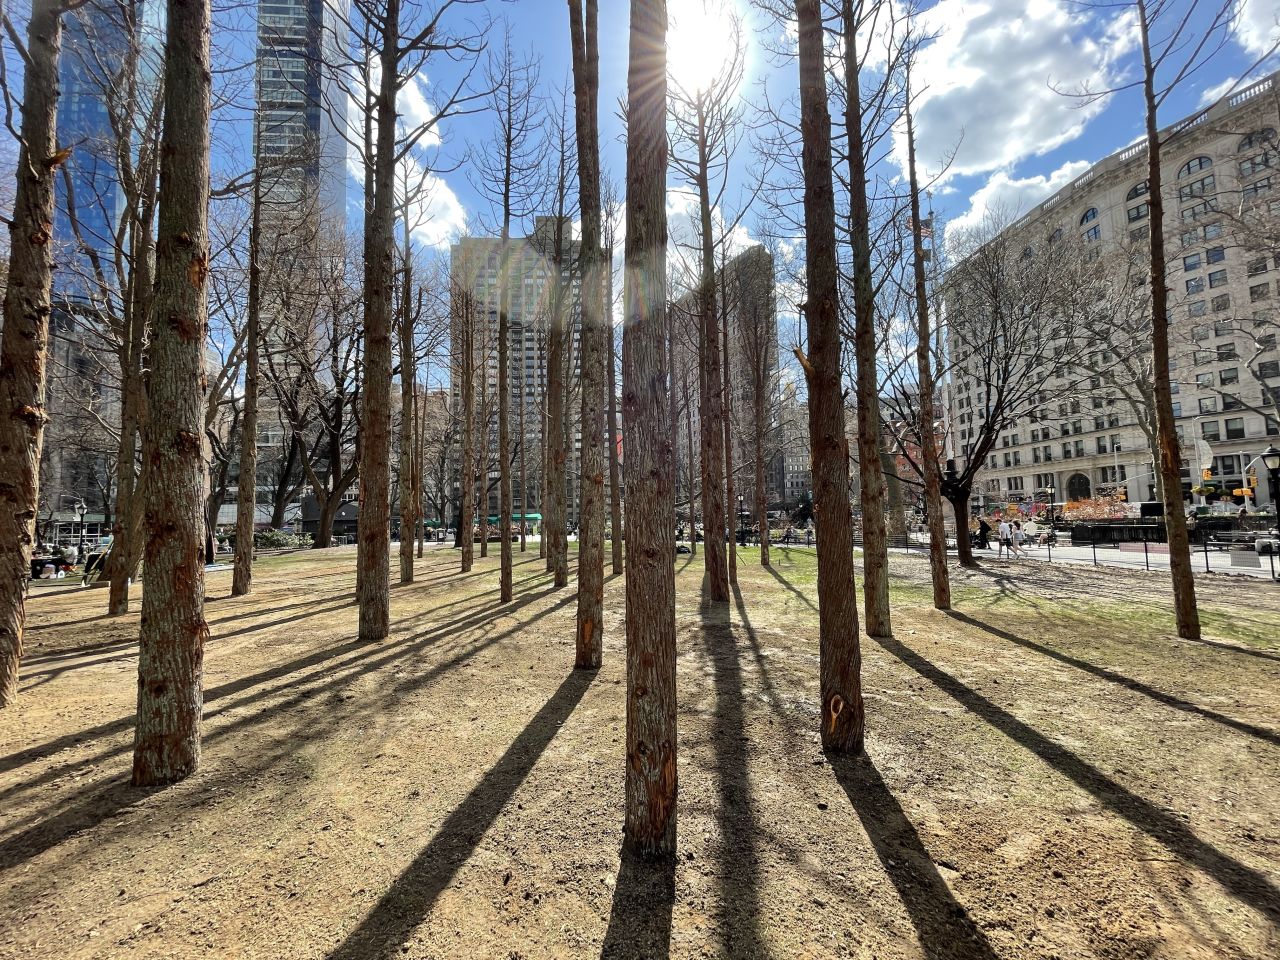 Maya Lin's graveyard of trees encourages passersby to consider Earth's dwindling forests.